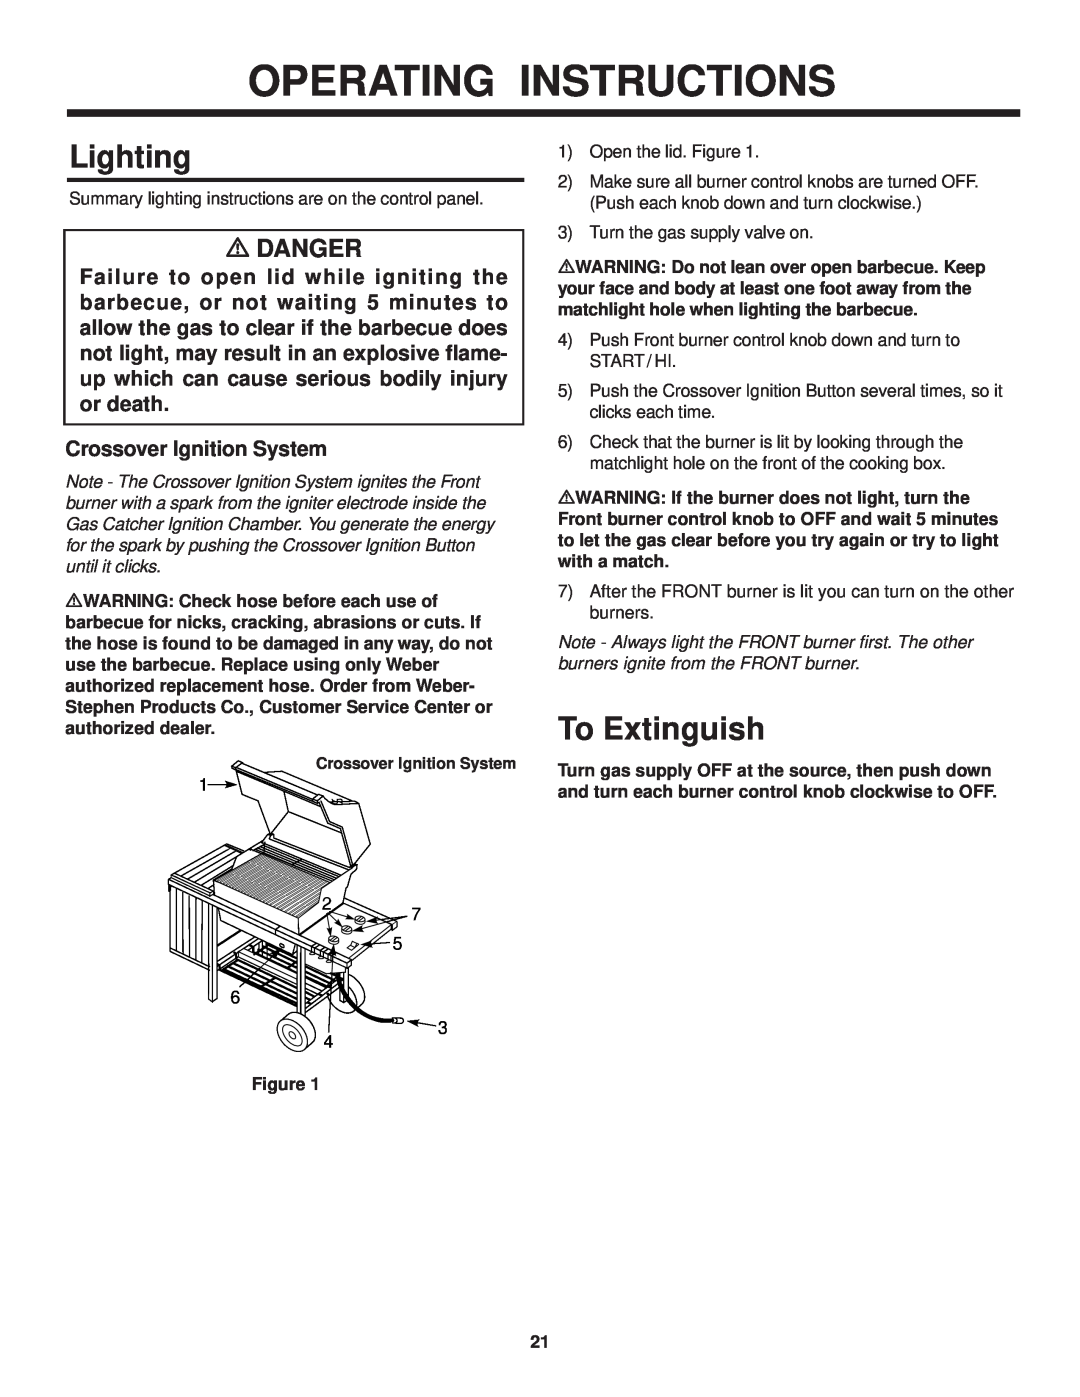 Weber 3000 LX owner manual Operating Instructions, Lighting, To Extinguish, m DANGER, Crossover Ignition System 